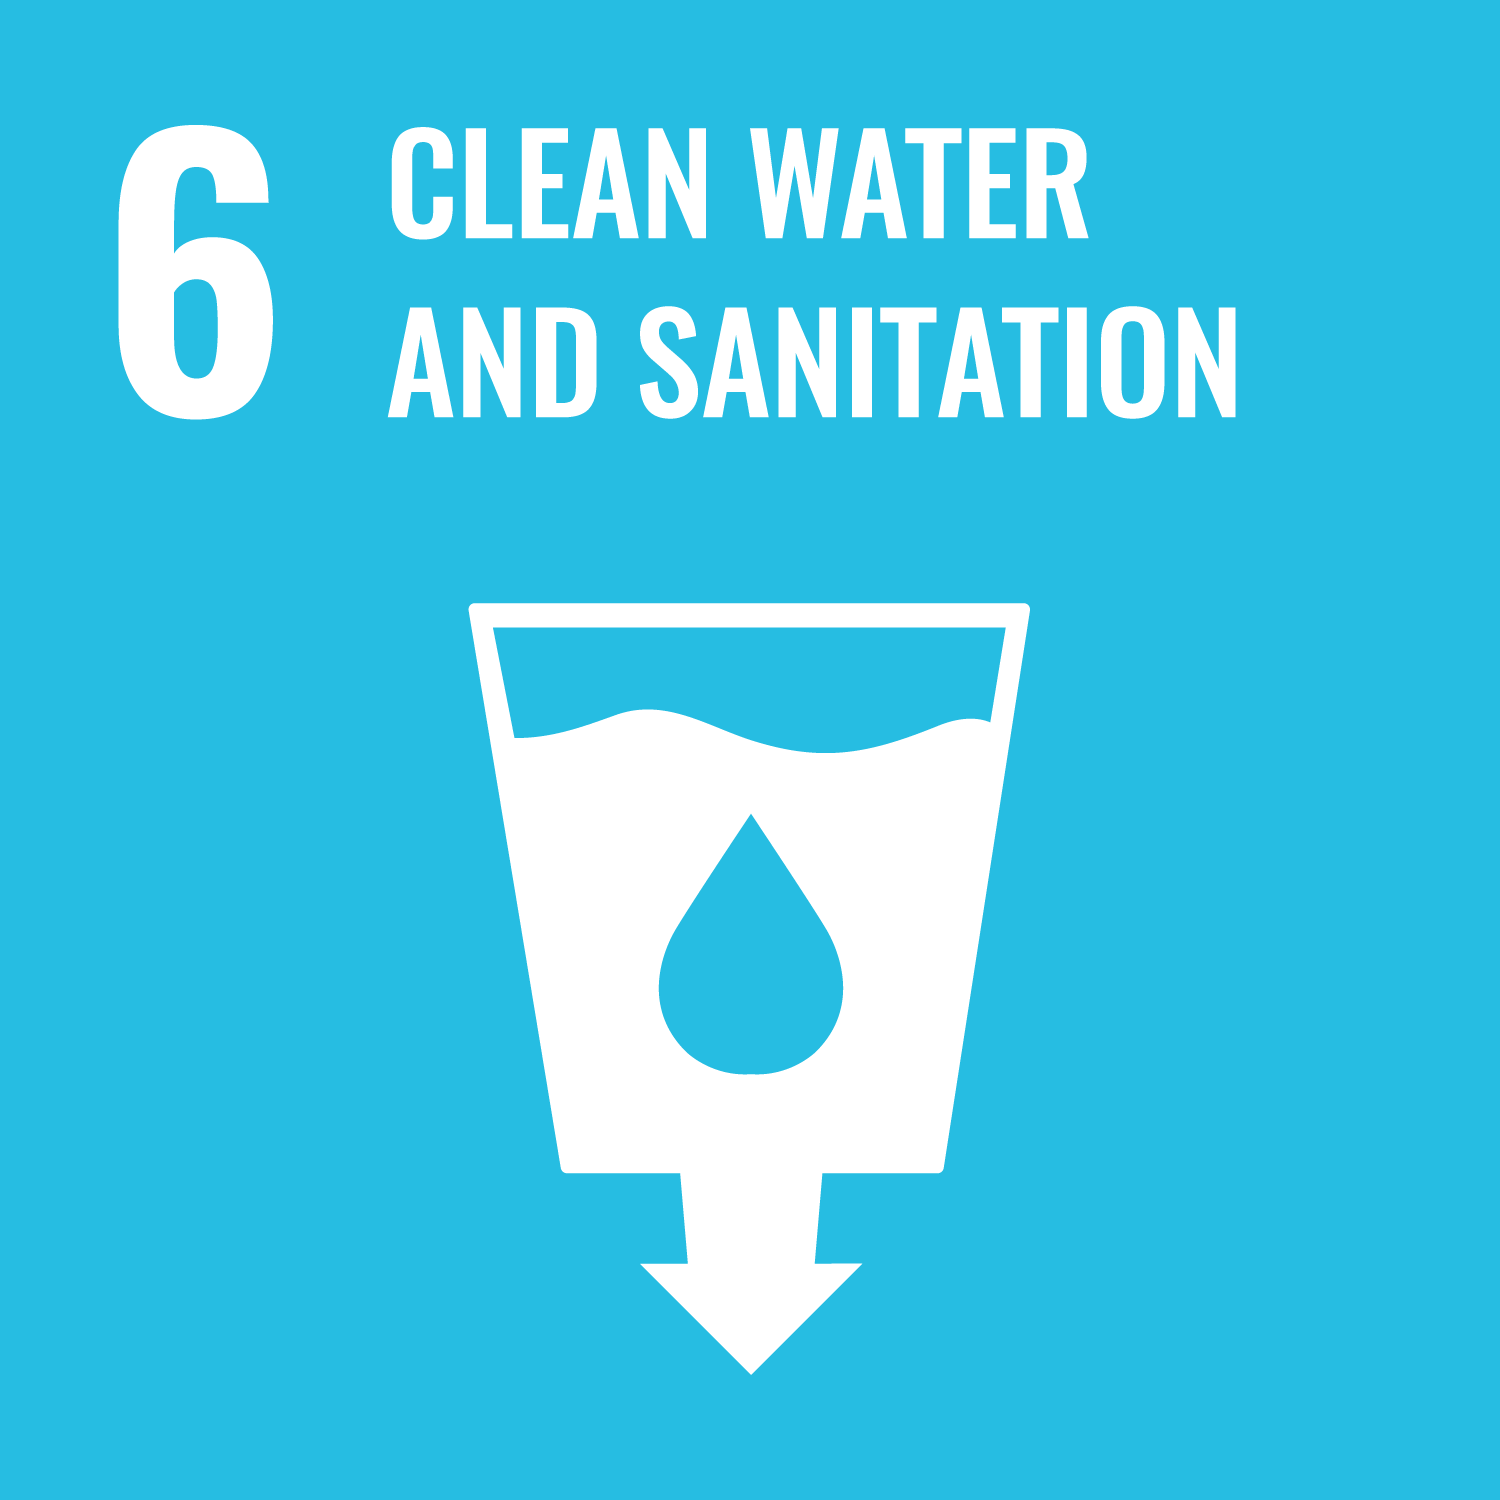 Sustainable Development Goal (SDG) number 6 represented by a light blue square featuring a white symbol of a water glass, the number '6,' and the description 'clean water and sanitation' in white letters